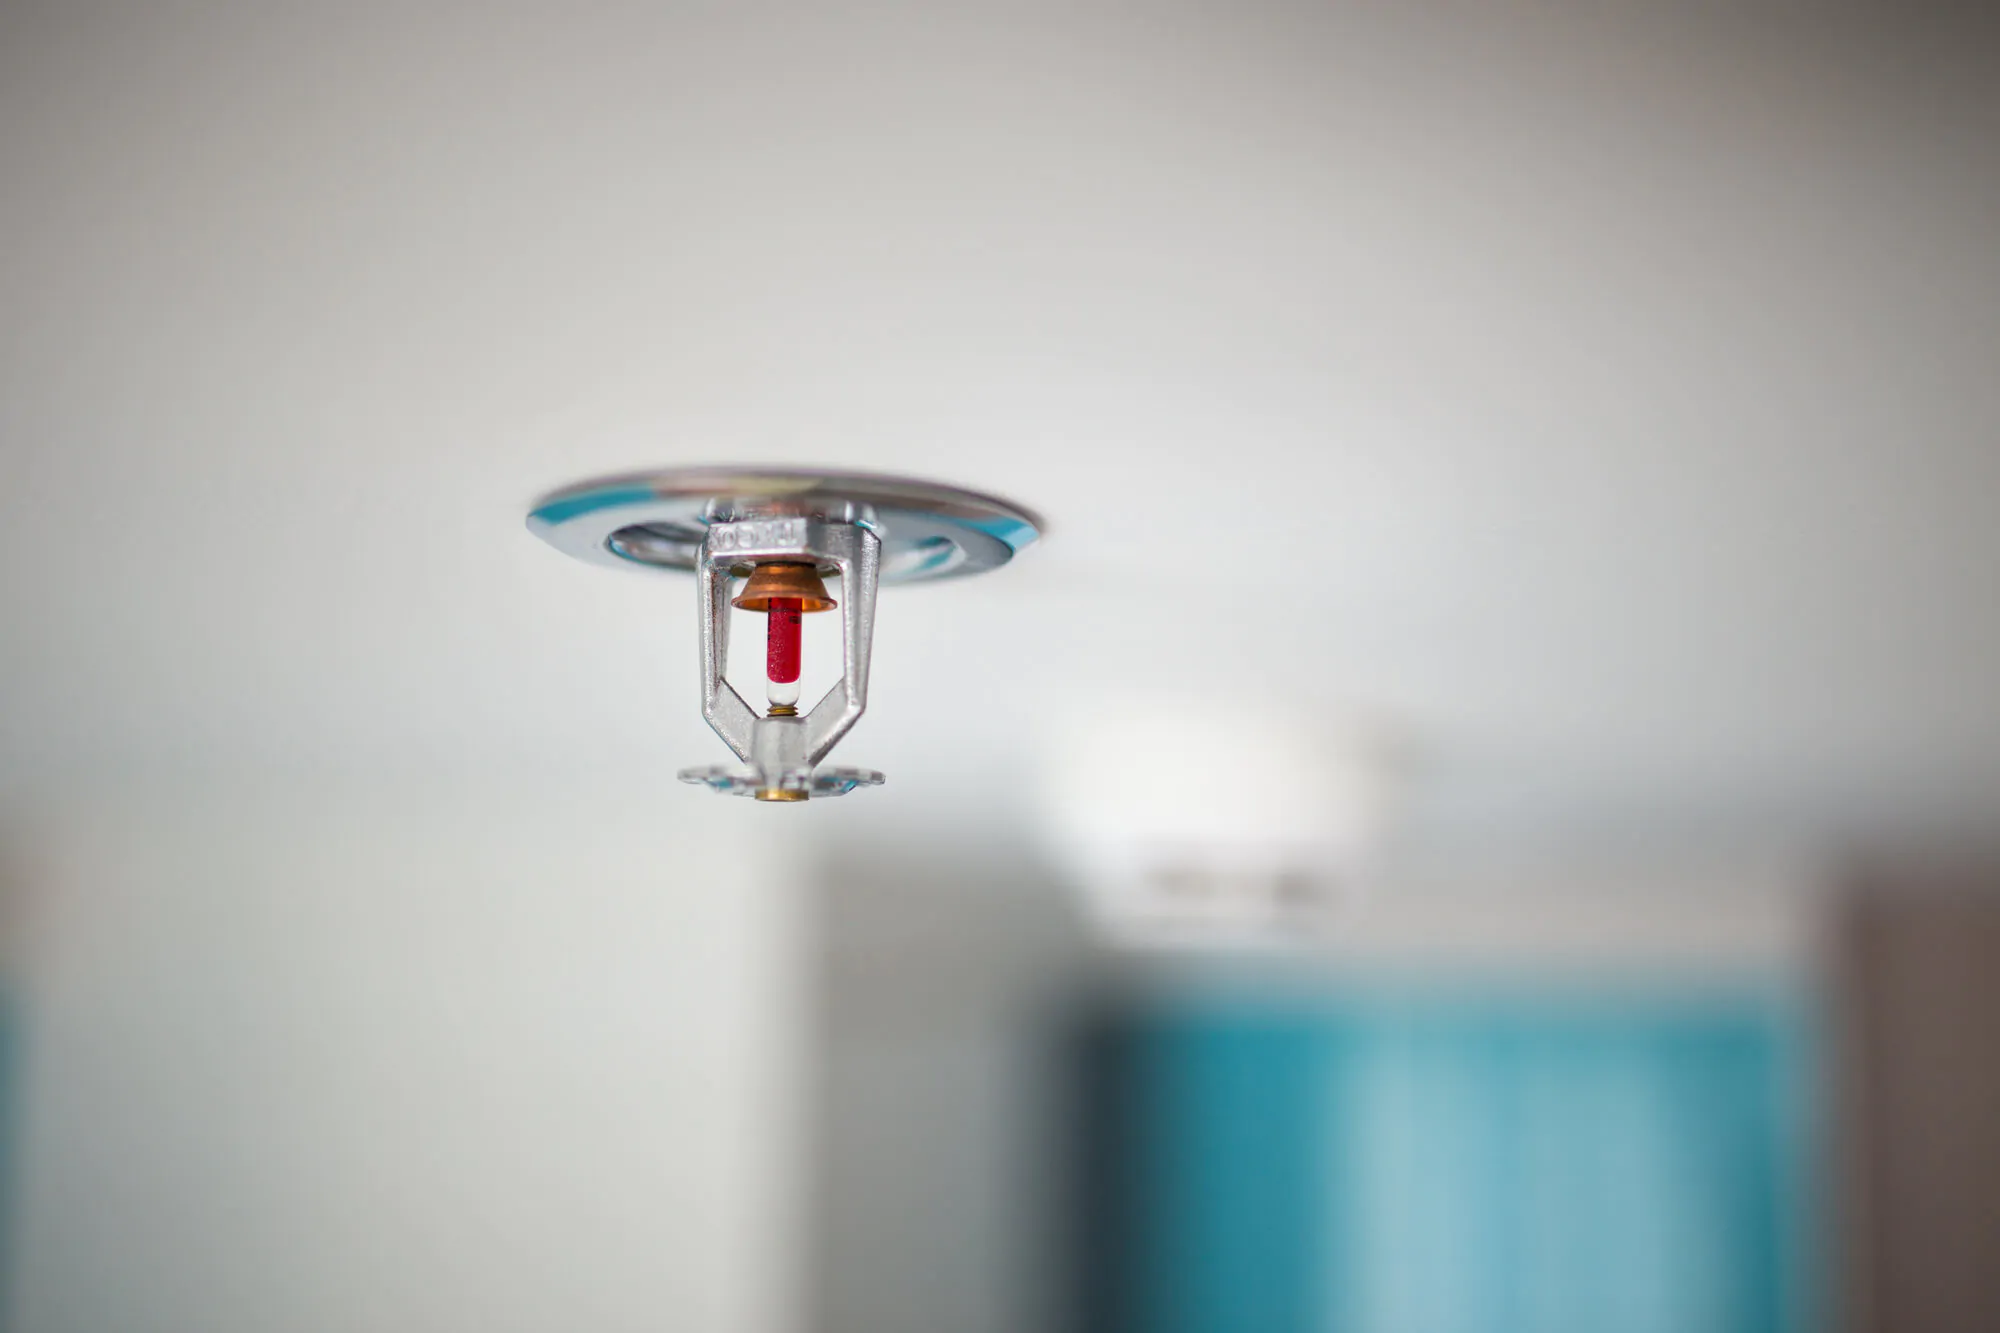 When are Fire Sprinklers Required in Residential and Commercial Buildings